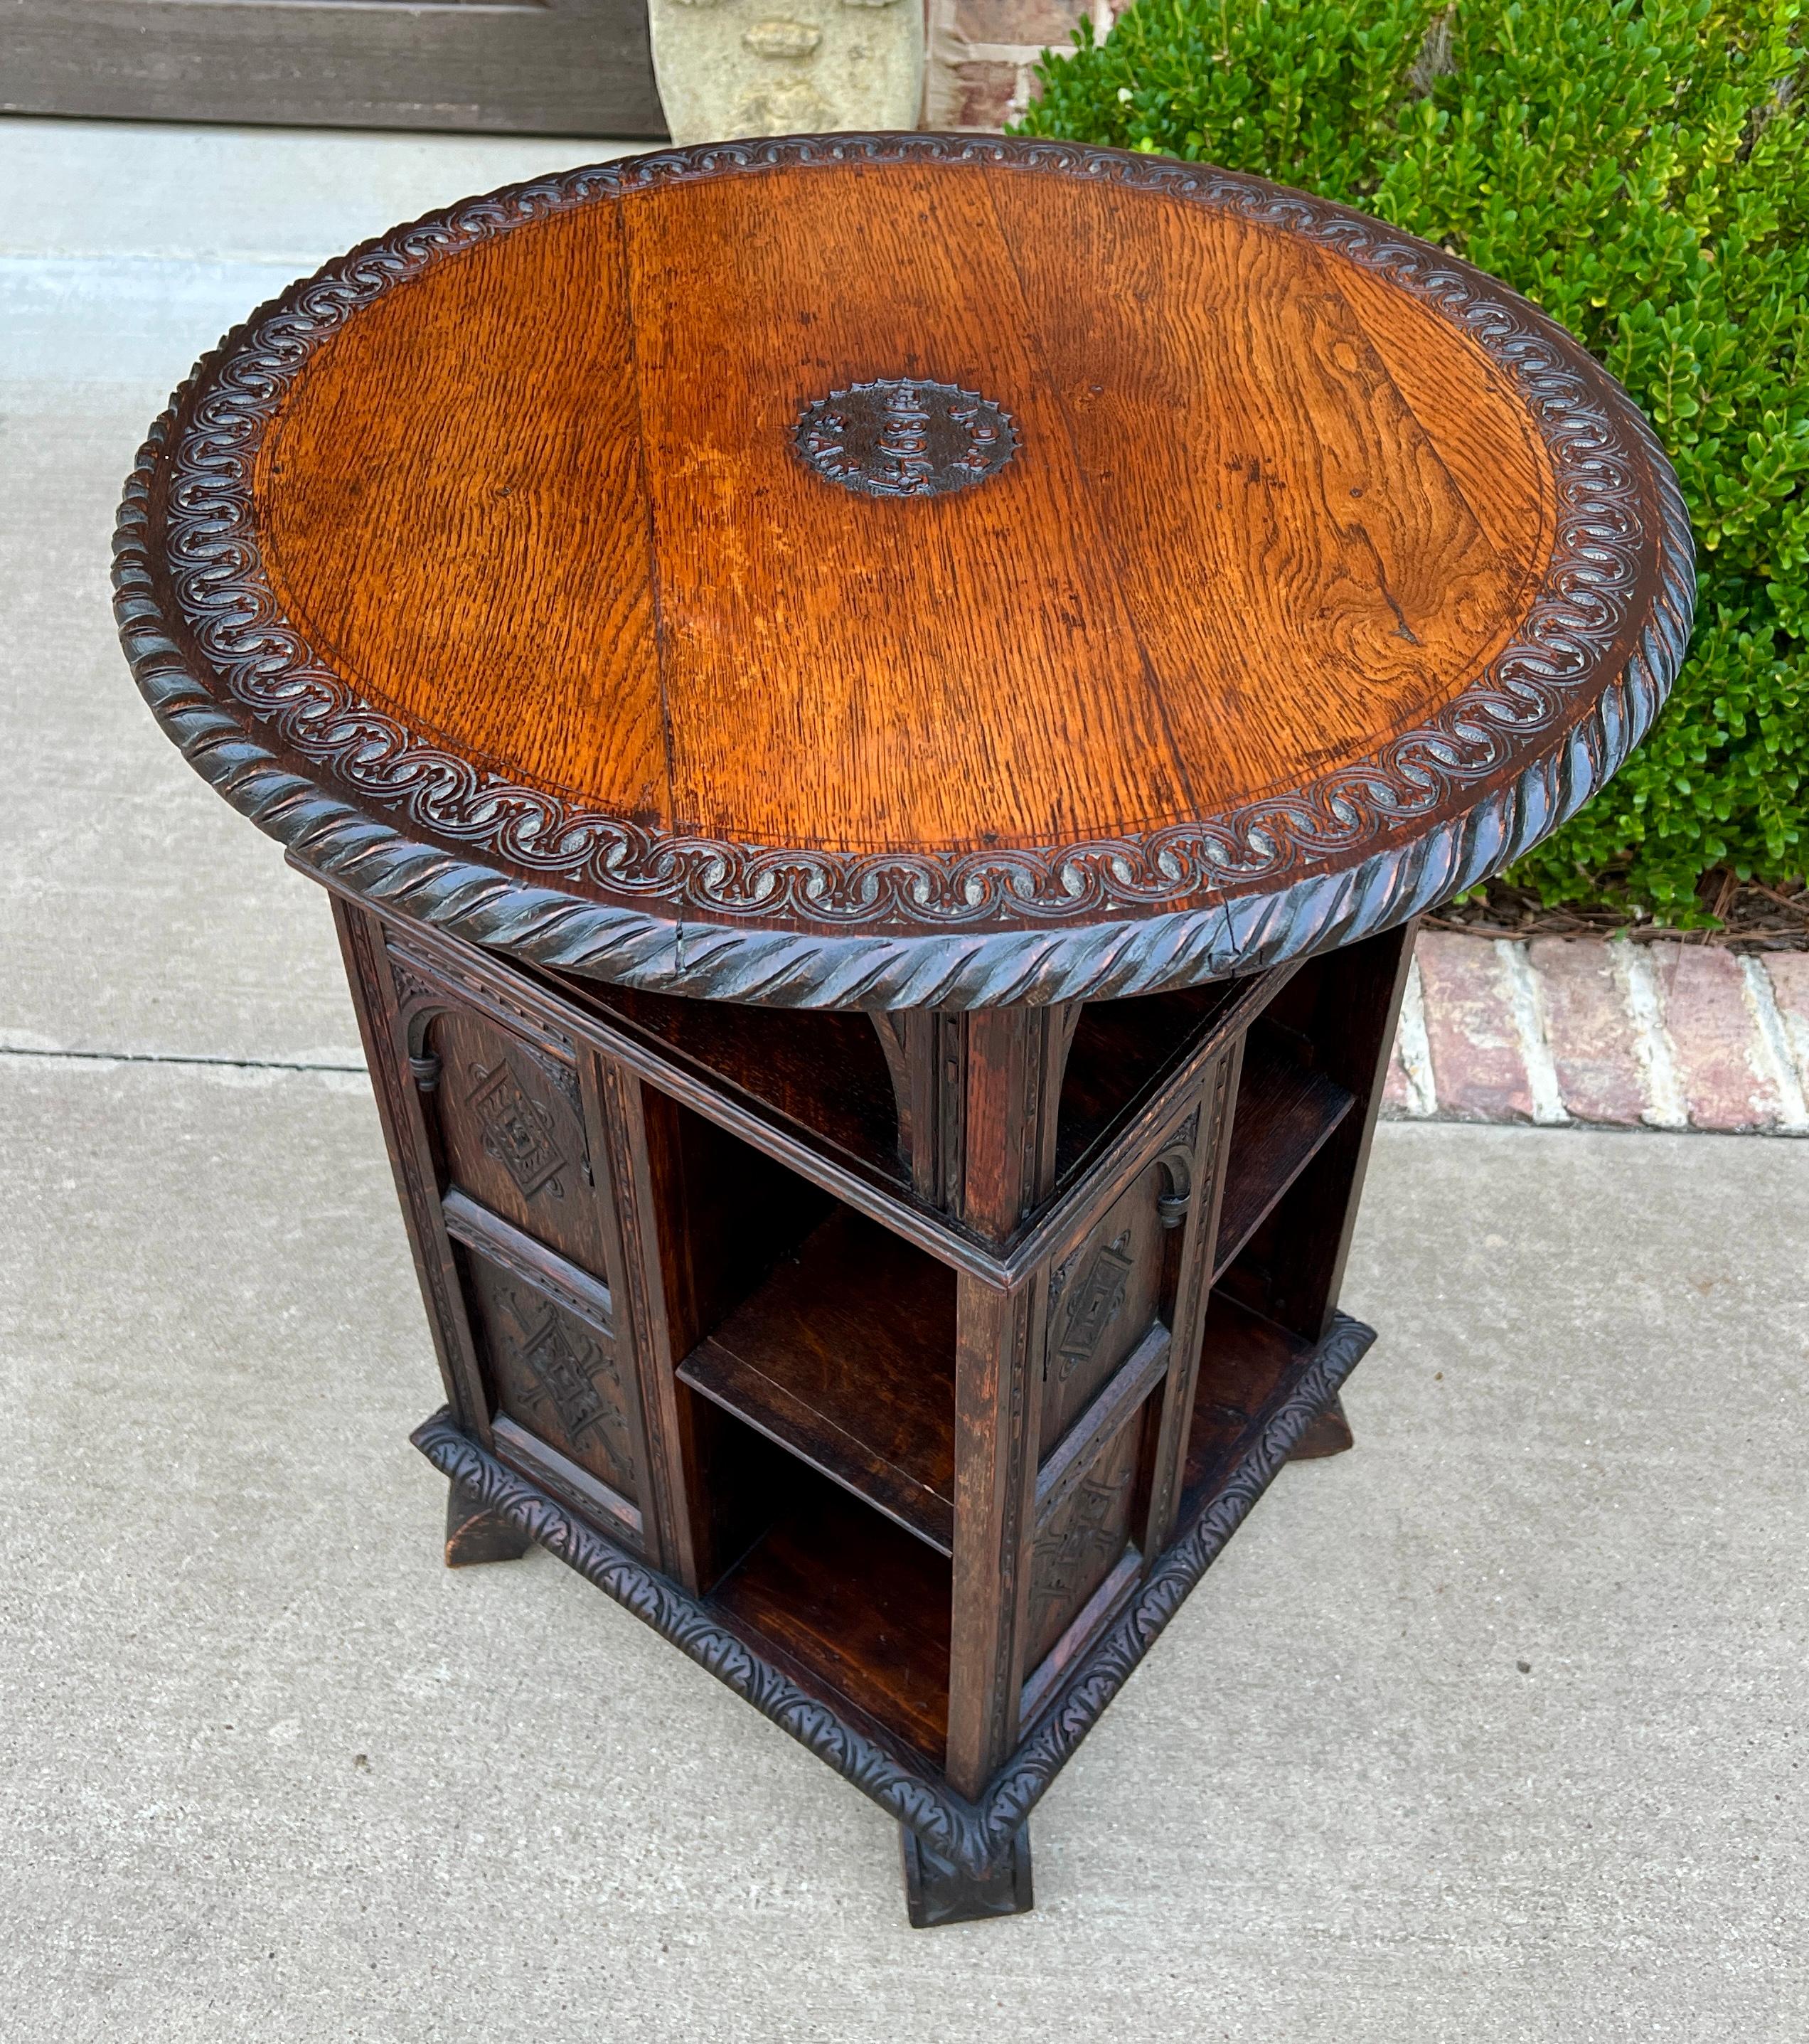 Antique English Revolving Bookcase Display Cabinet Round Table Top Oak c. 1894 9